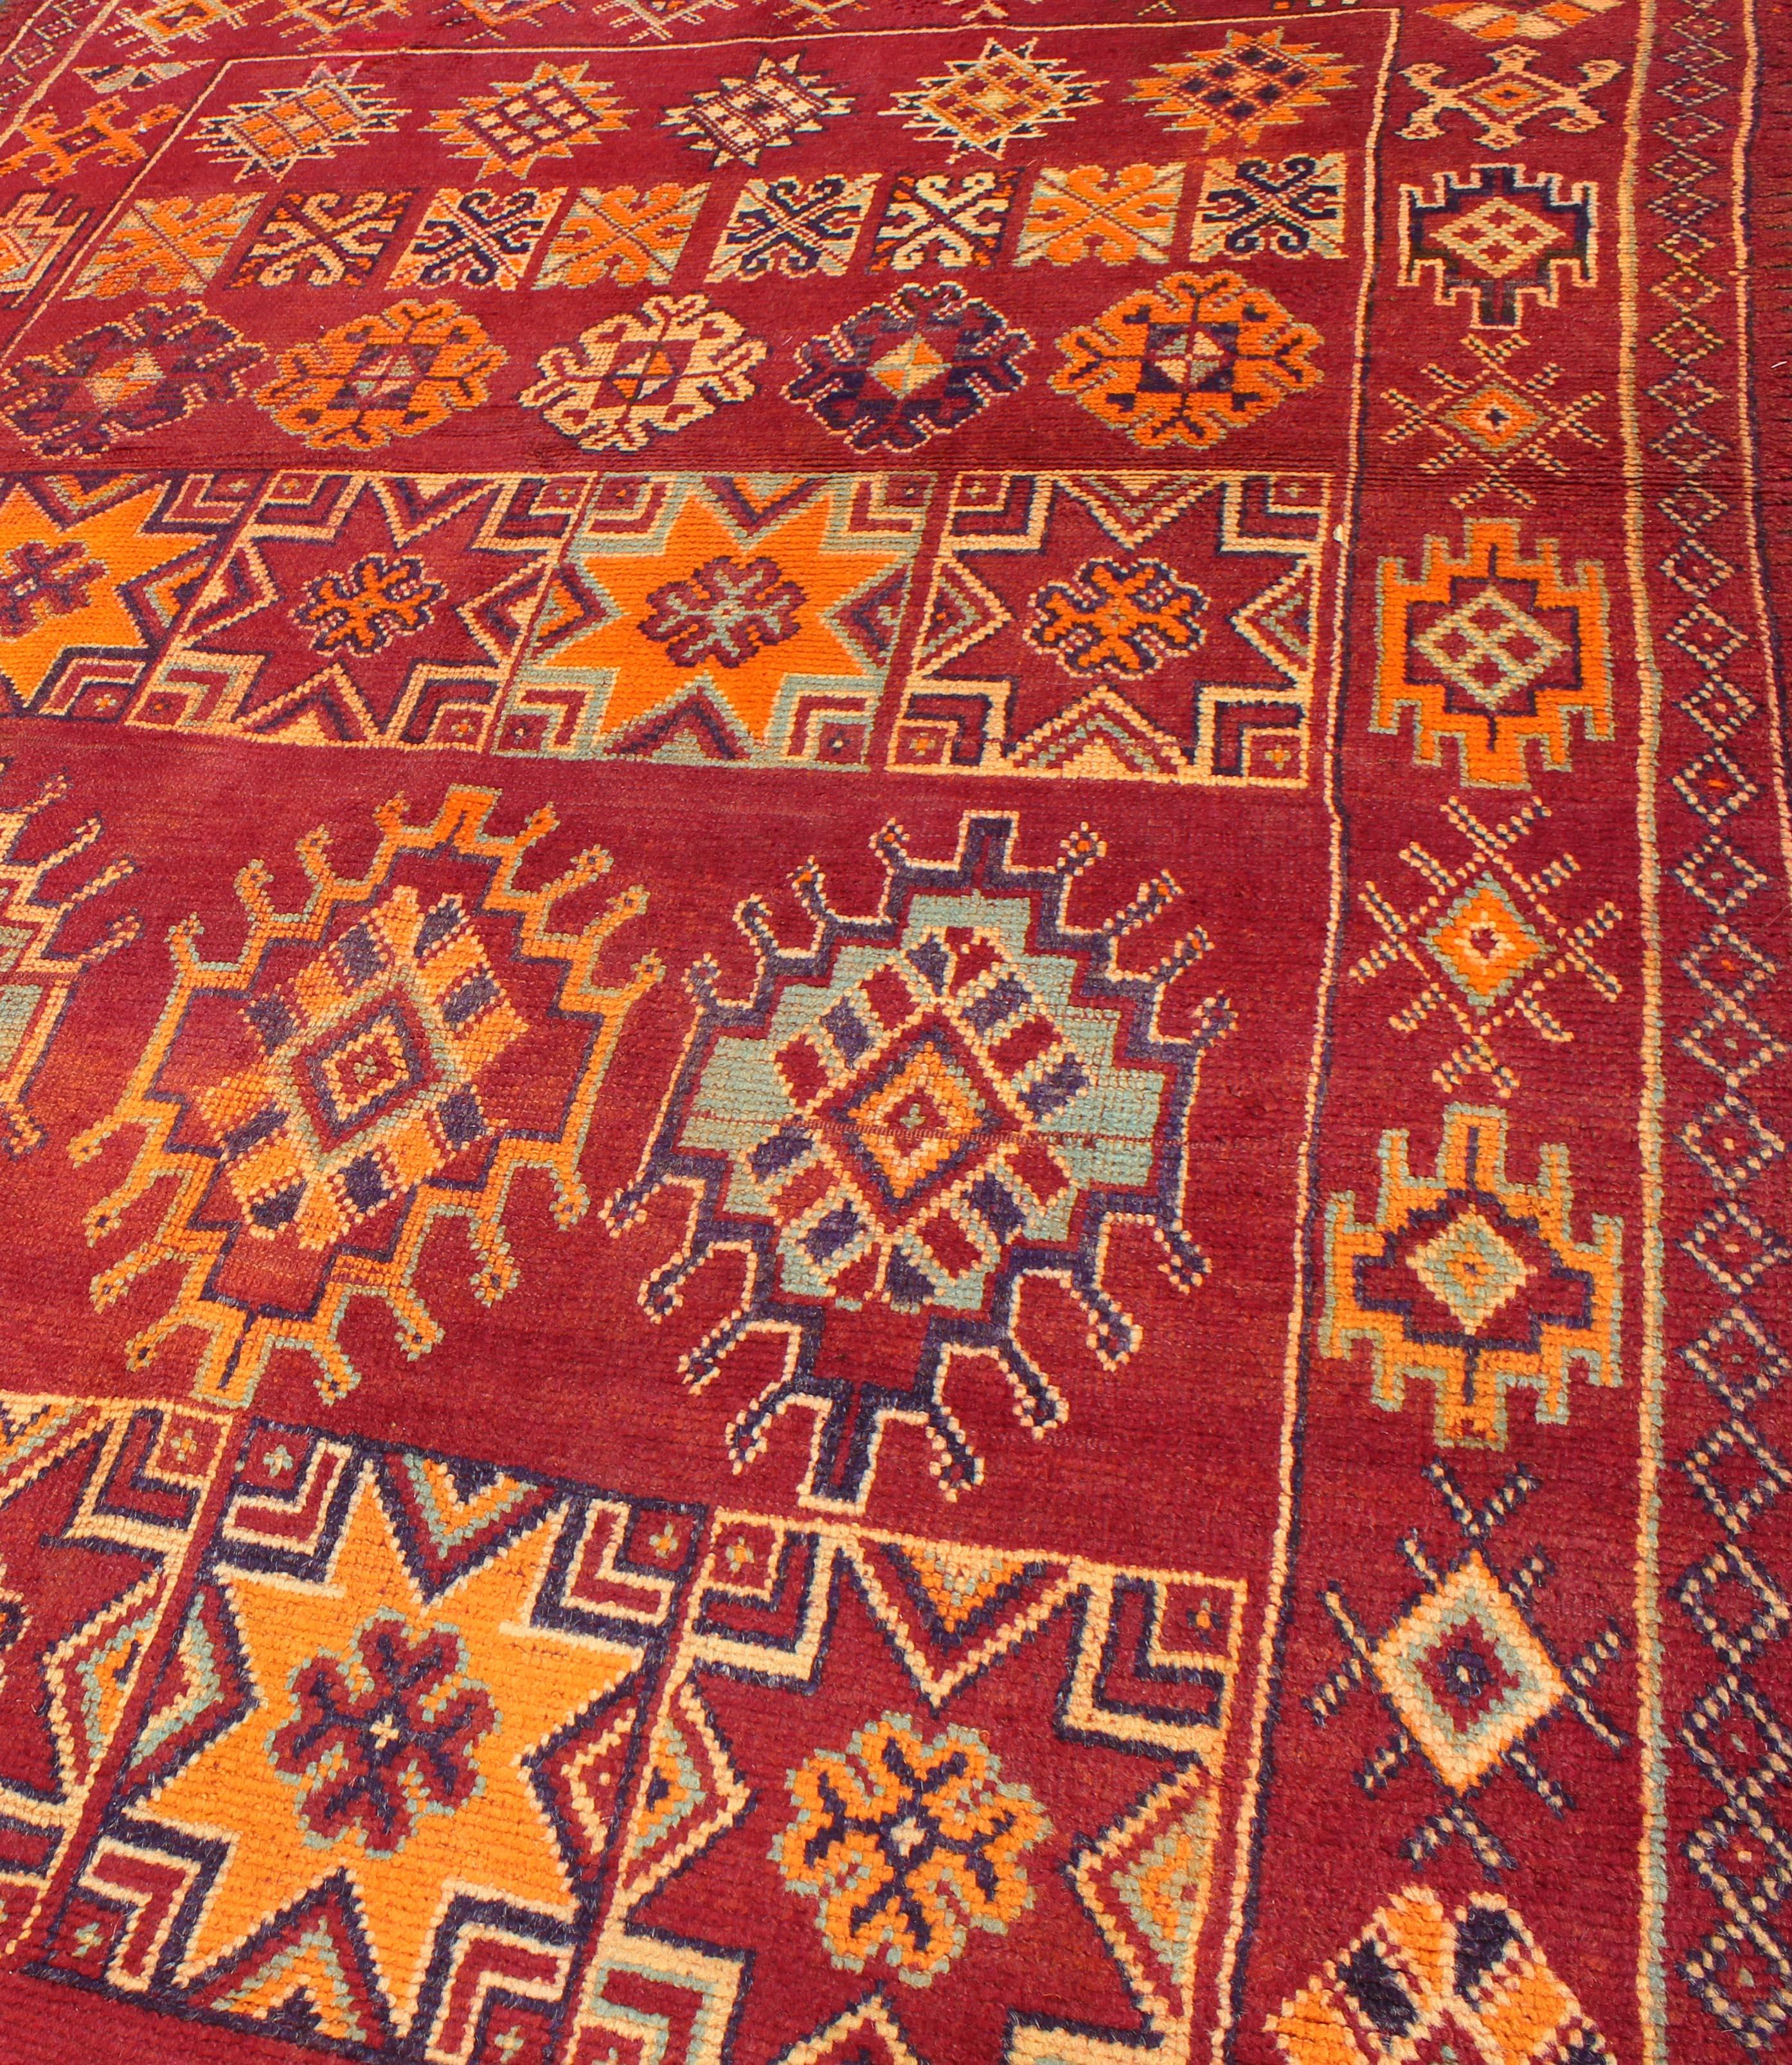 Hand-Knotted Antique Moroccan Rug in Crimson Red, Orange, Blue and Yellow